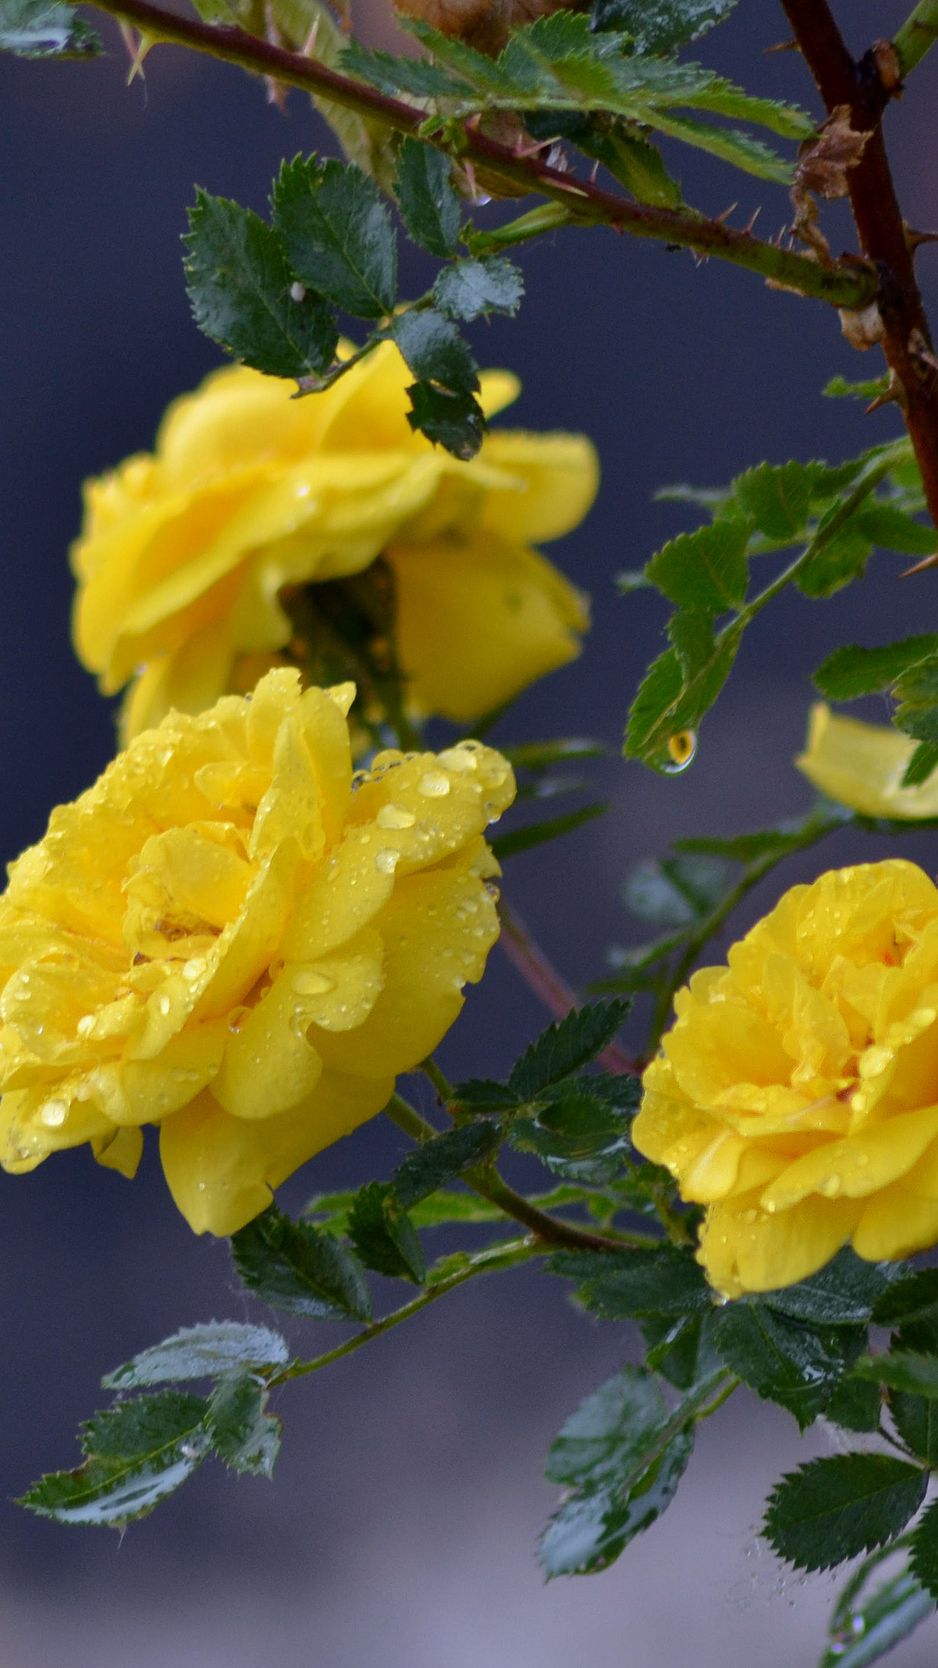 Download wallpaper 938x1668 flowers, roses, branch, drops, yellow roses  iphone 8/7/6s/6 for parallax hd background